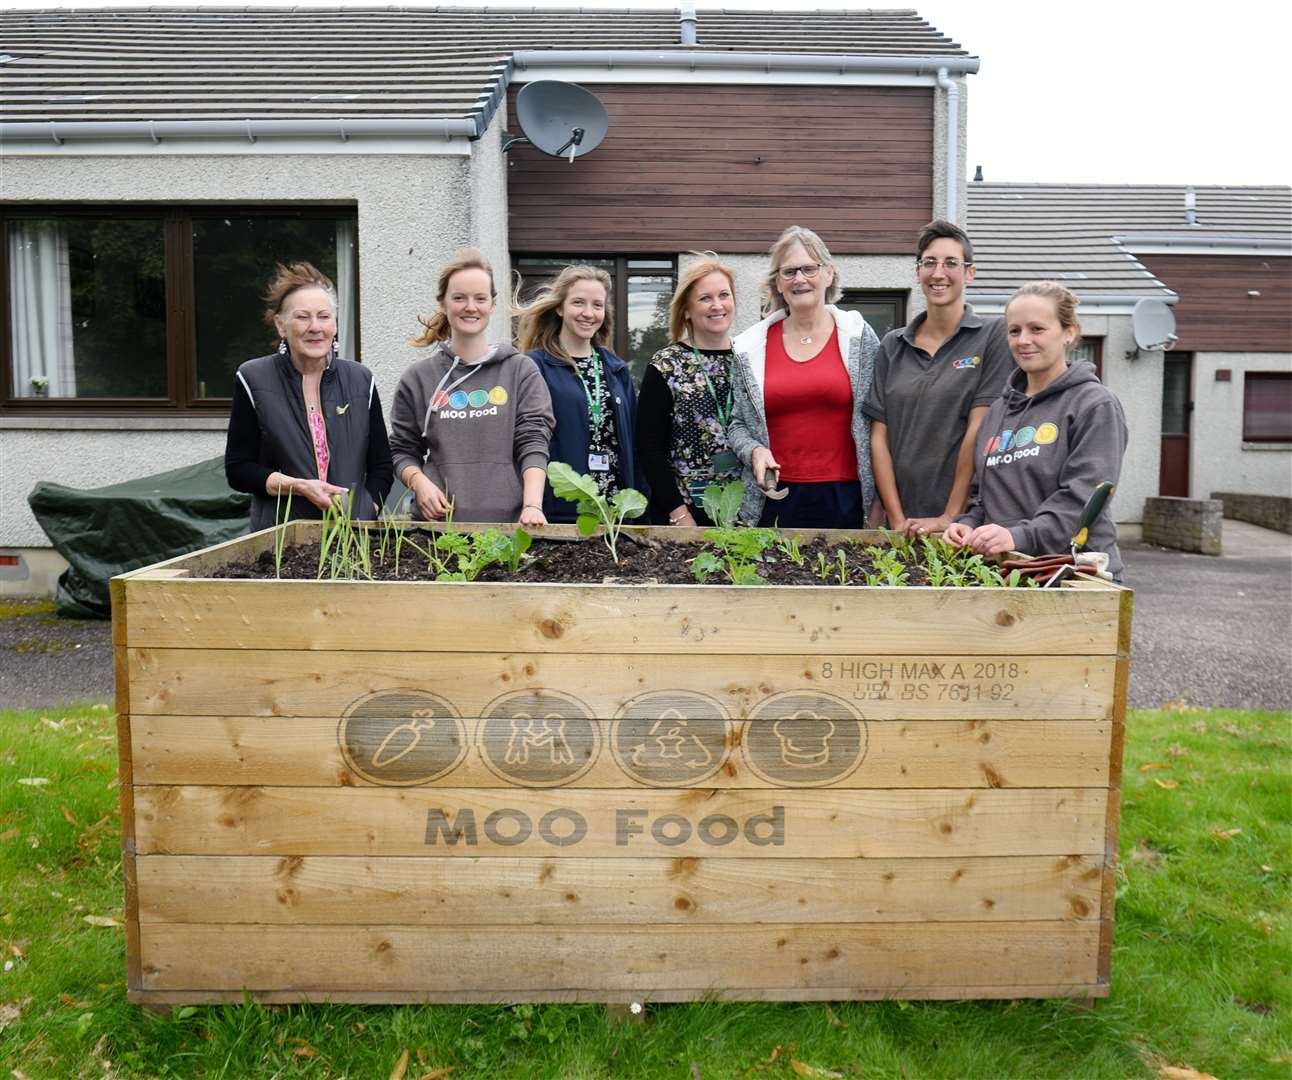 The grow-your-own food project food boxes at sheltered housing in Muir of Ord.